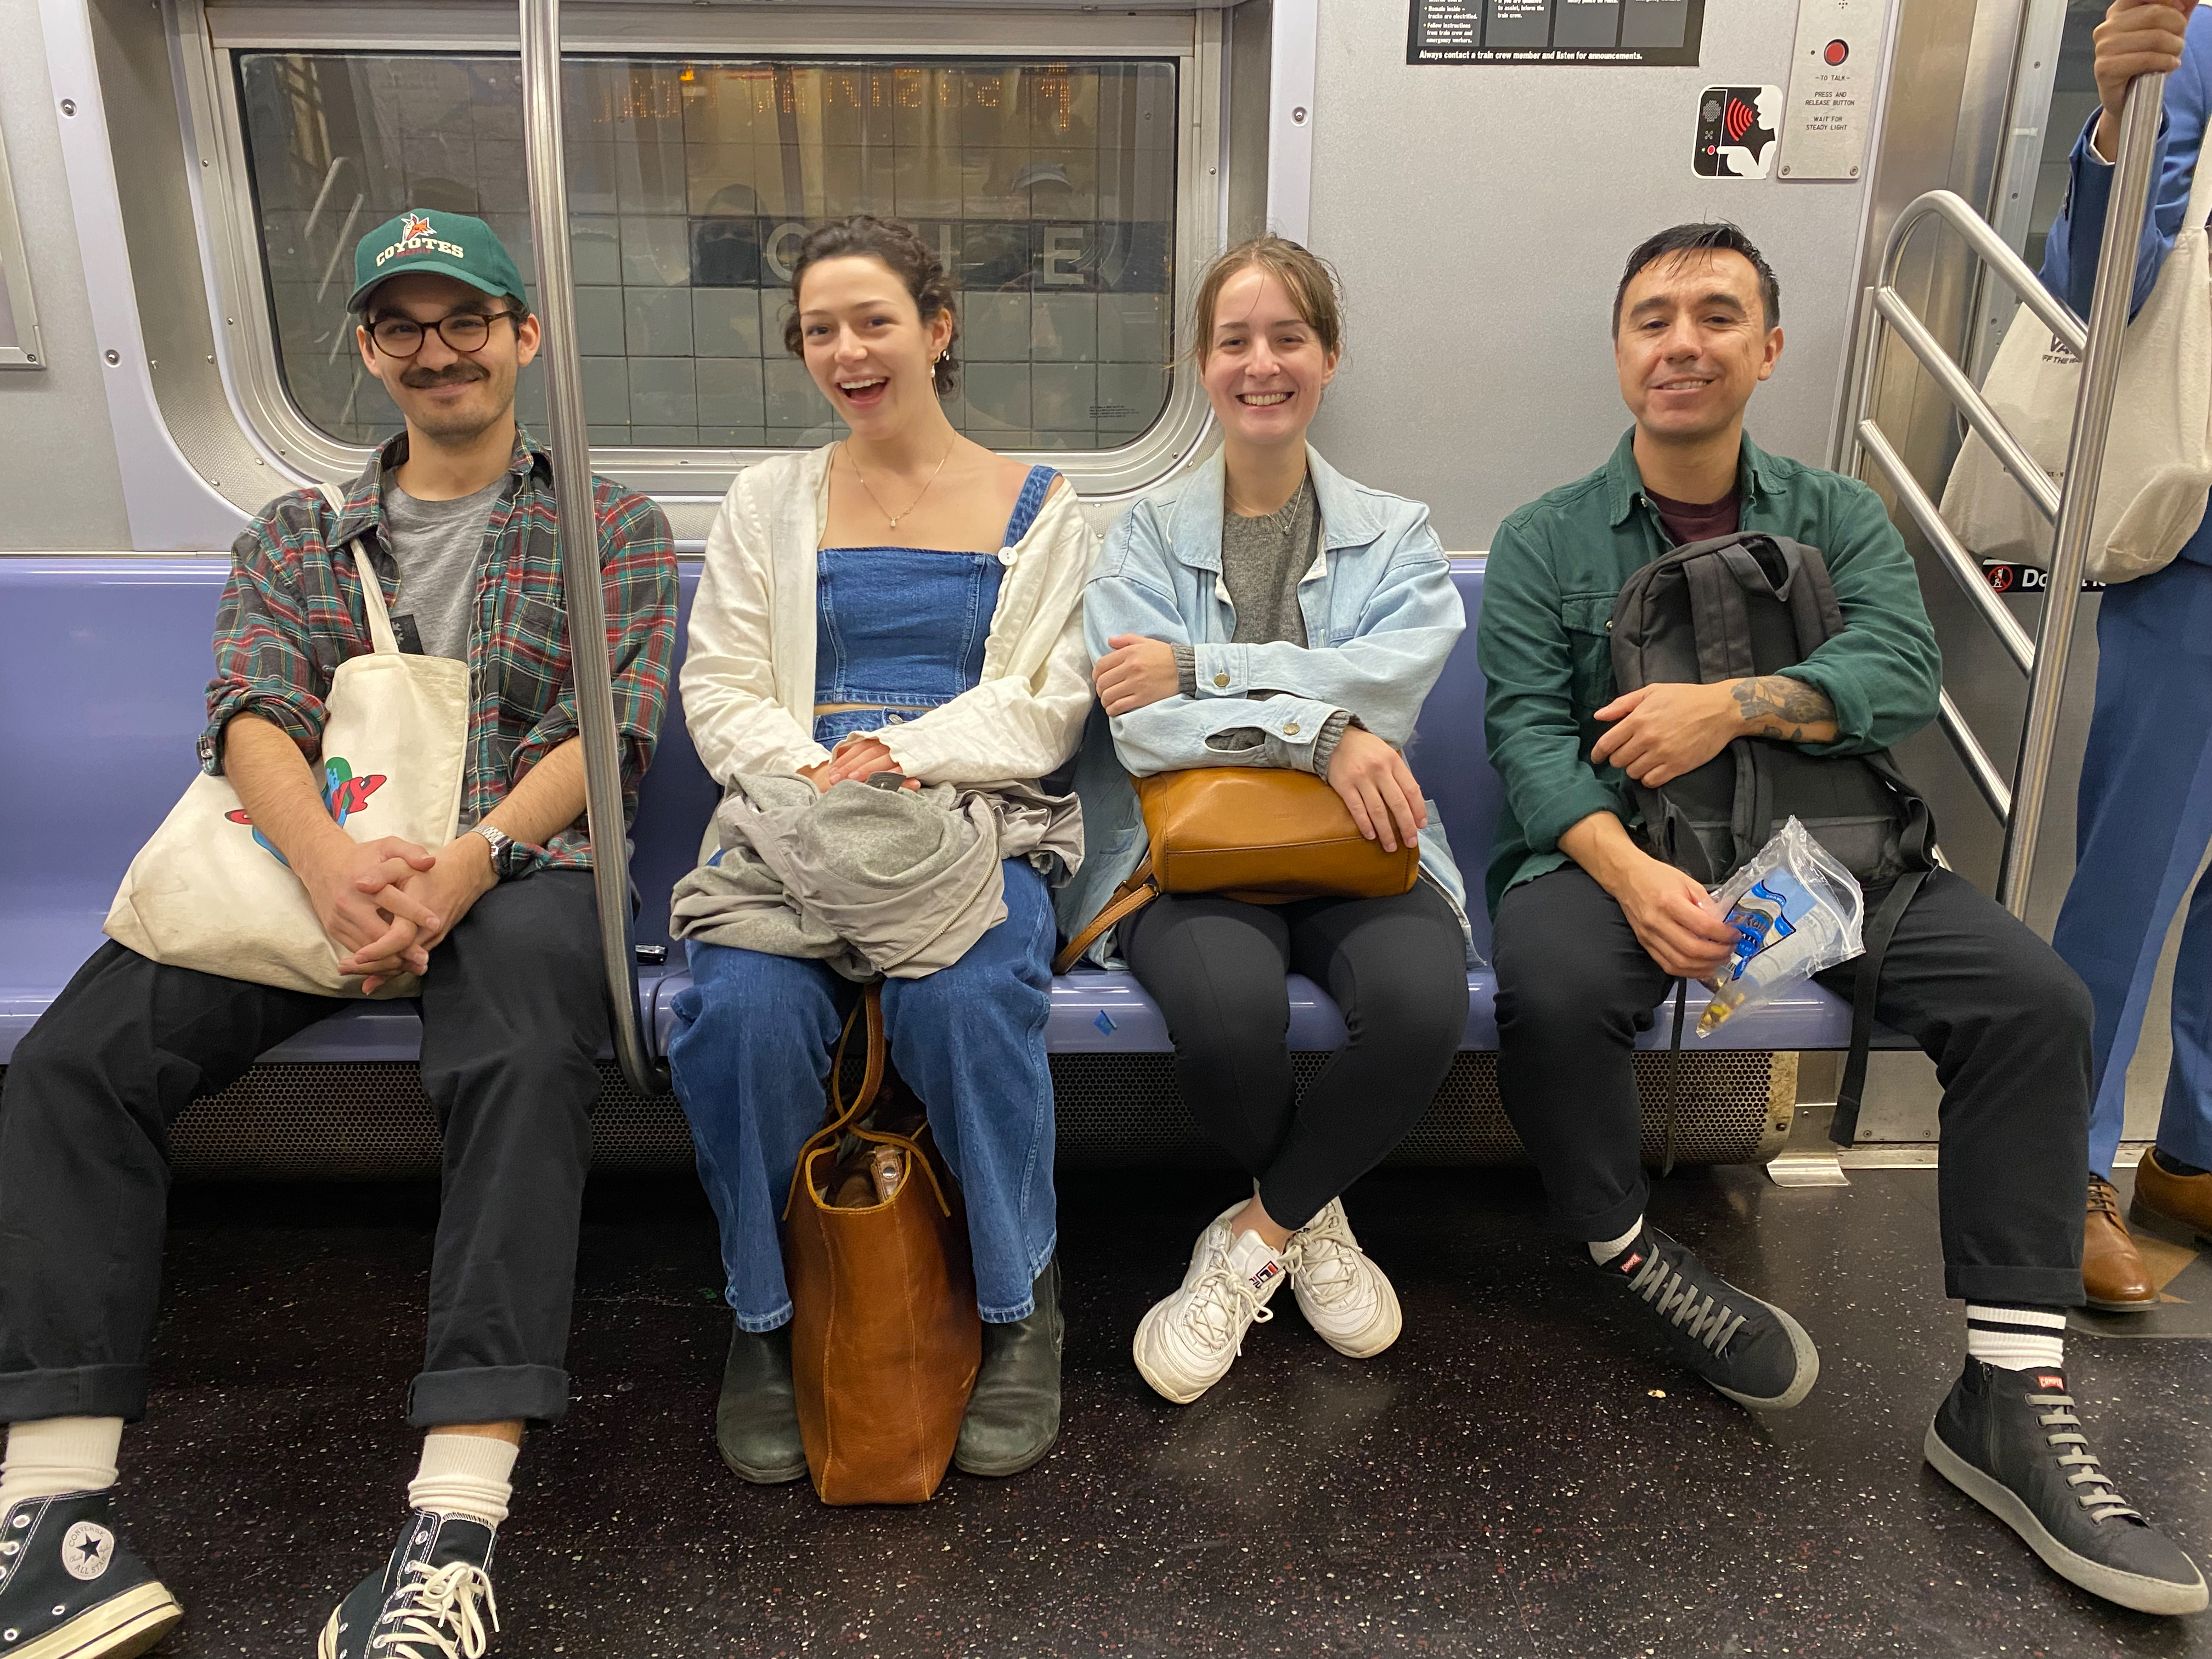 RIT photography students Justin Aungst, Nell Pittman, Madelyn Lohman and Louis Chavez on a train.